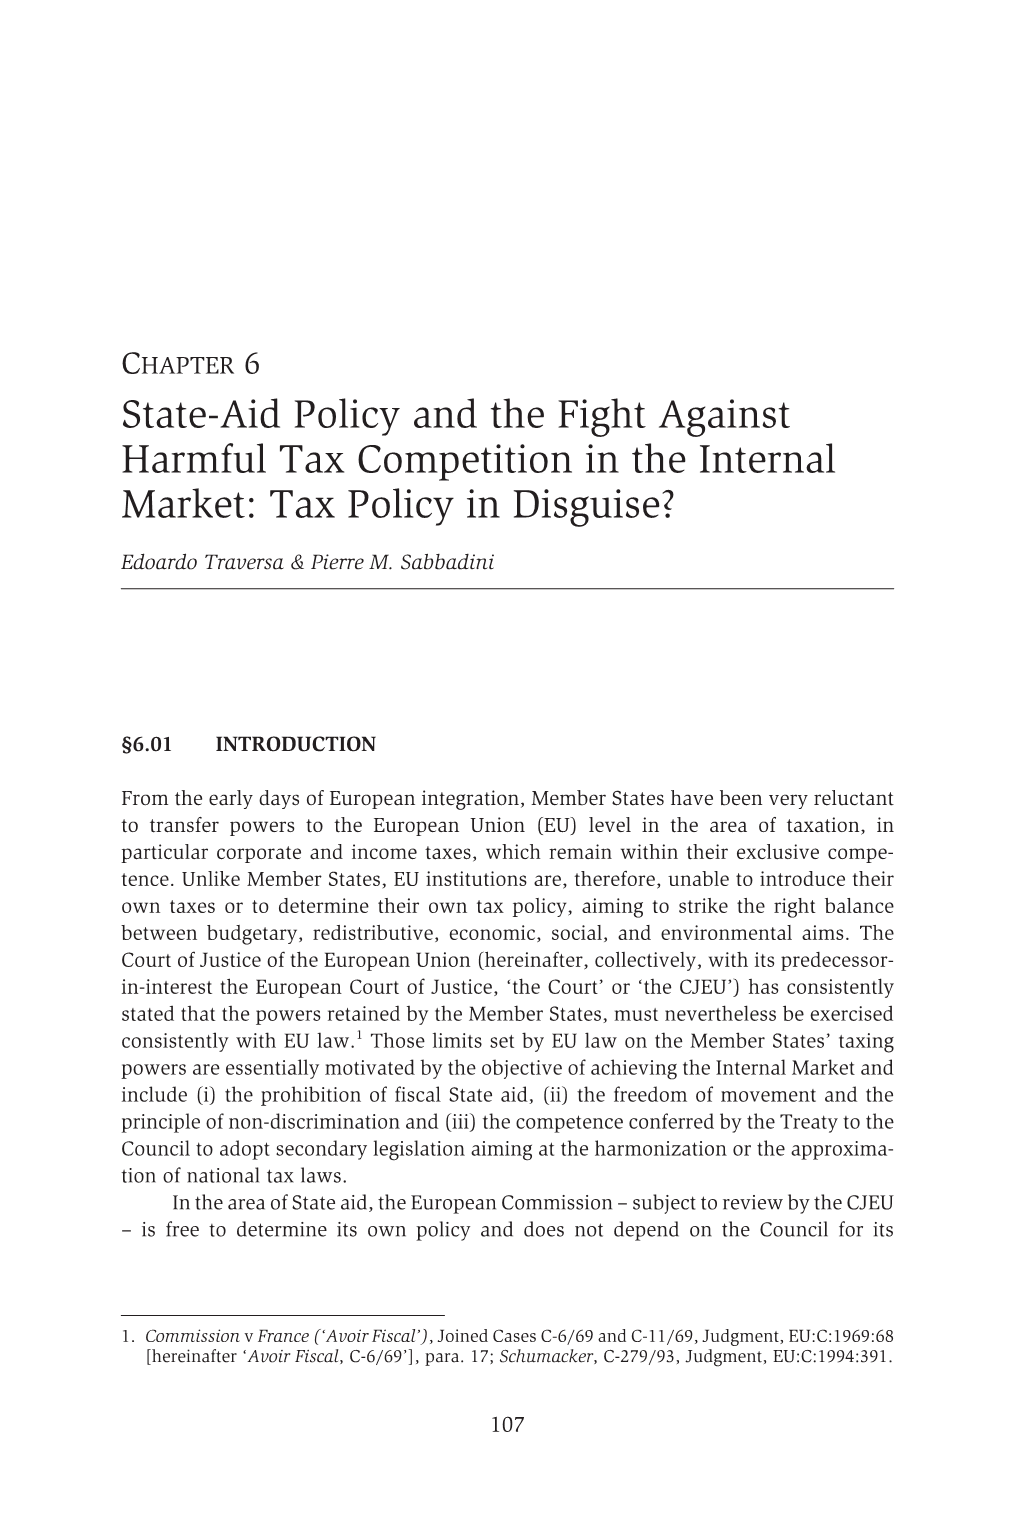 State-Aid Policy and the Fight Against Harmful Tax Competition in the Internal Market: Tax Policy in Disguise?